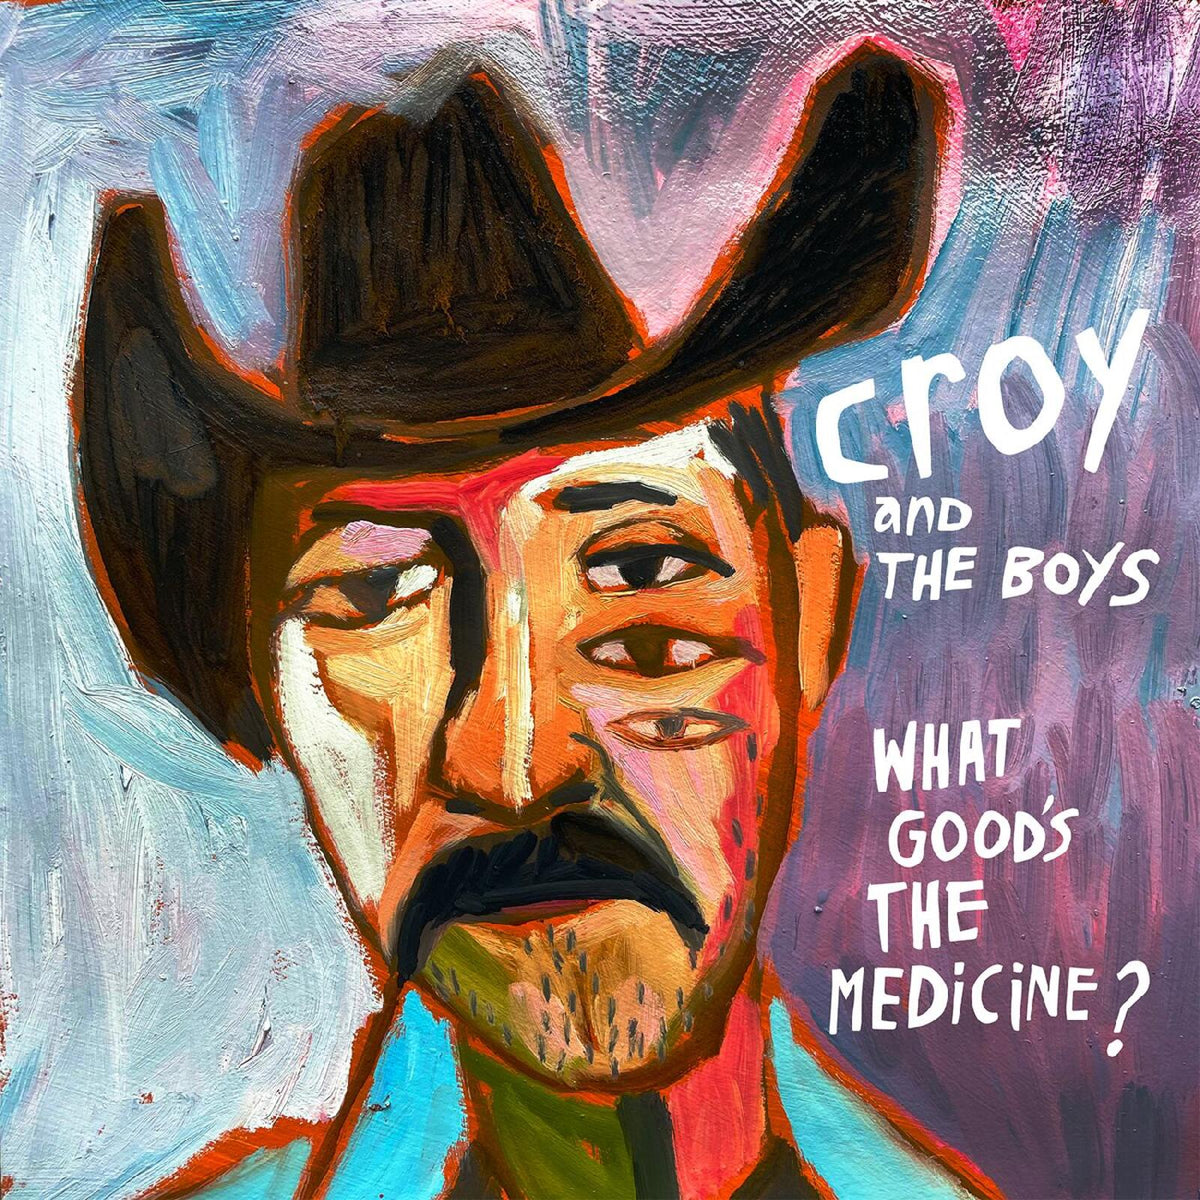 Croy & The Boys "What Good's The Medicine?